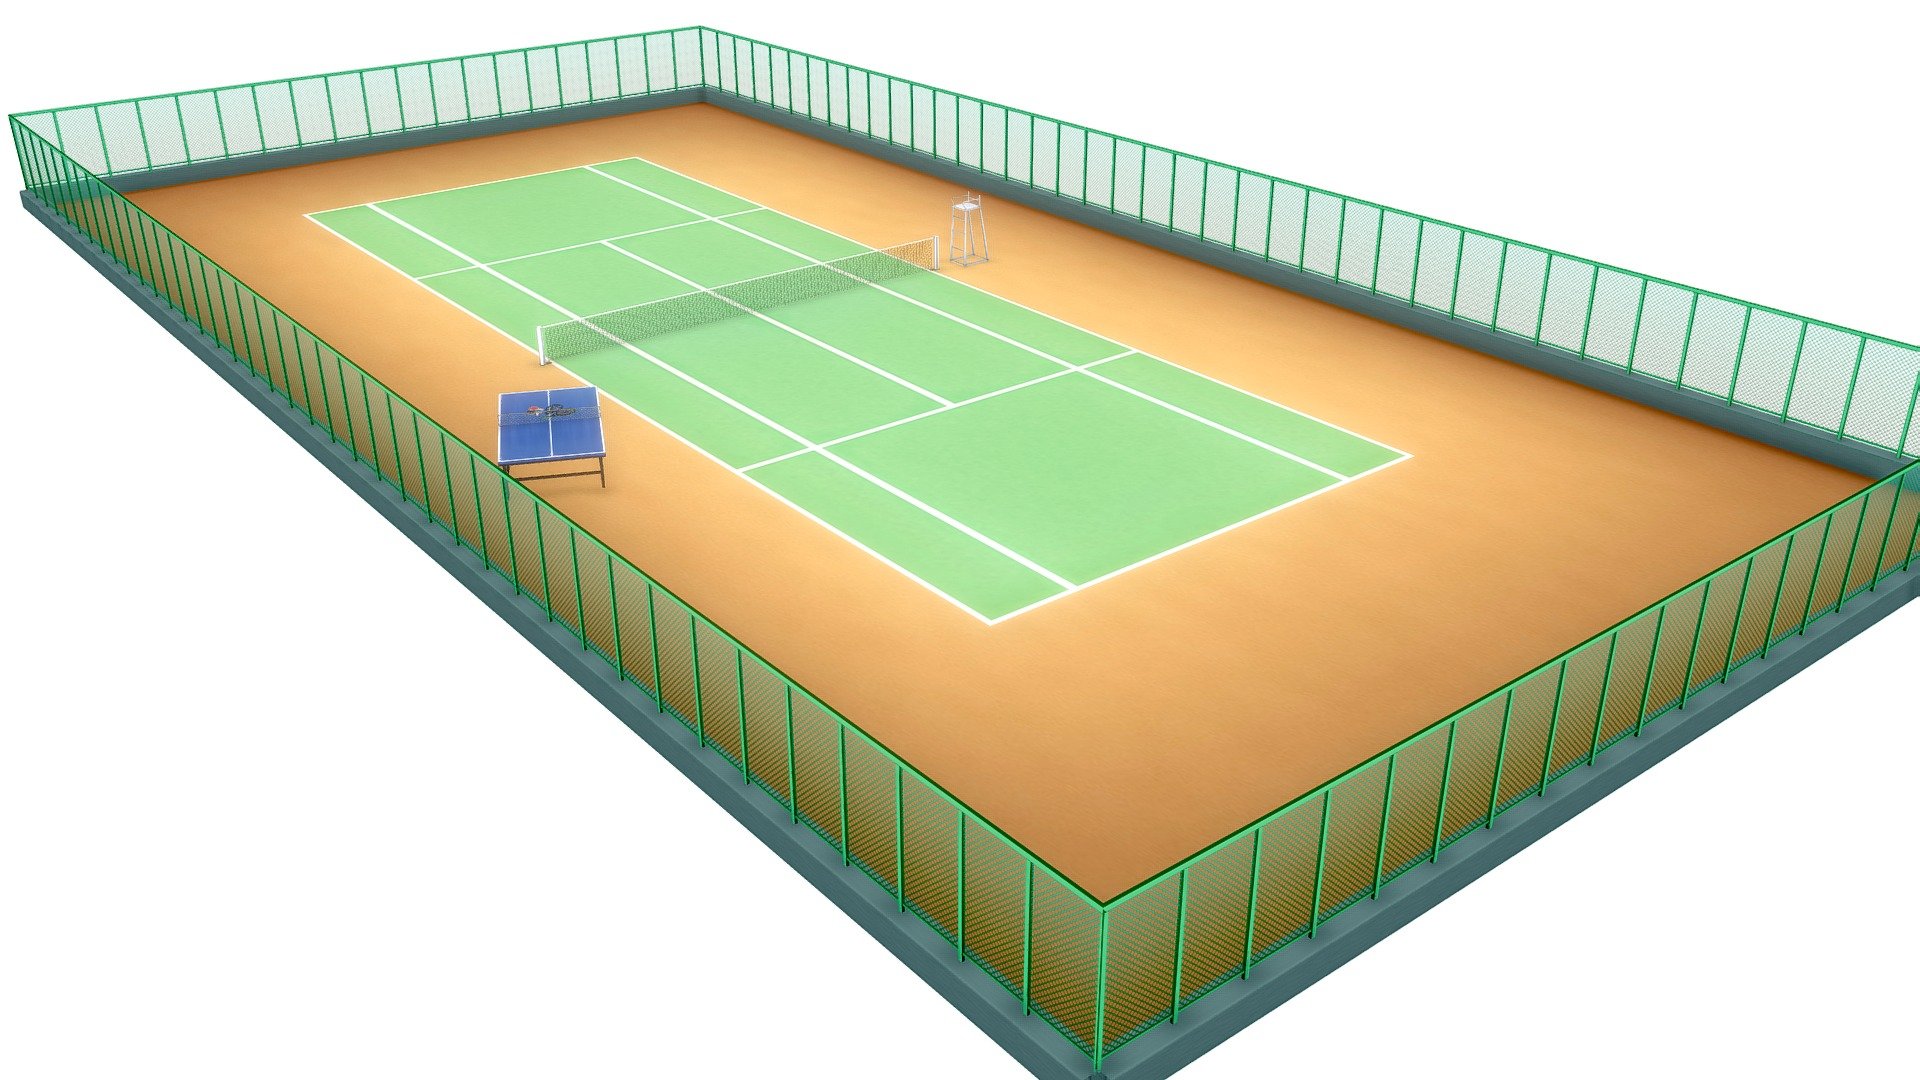 This anime tennis court is depicted with a classic design, featuring vibrant colors and clean lines. It provides the perfect stage for intense matches and friendly competitions alike.

Contains:




.Blend (Blender source)

.Fbx

Textures
 - Anime Tennis Court - Buy Royalty Free 3D model by LessaB3D 3d model